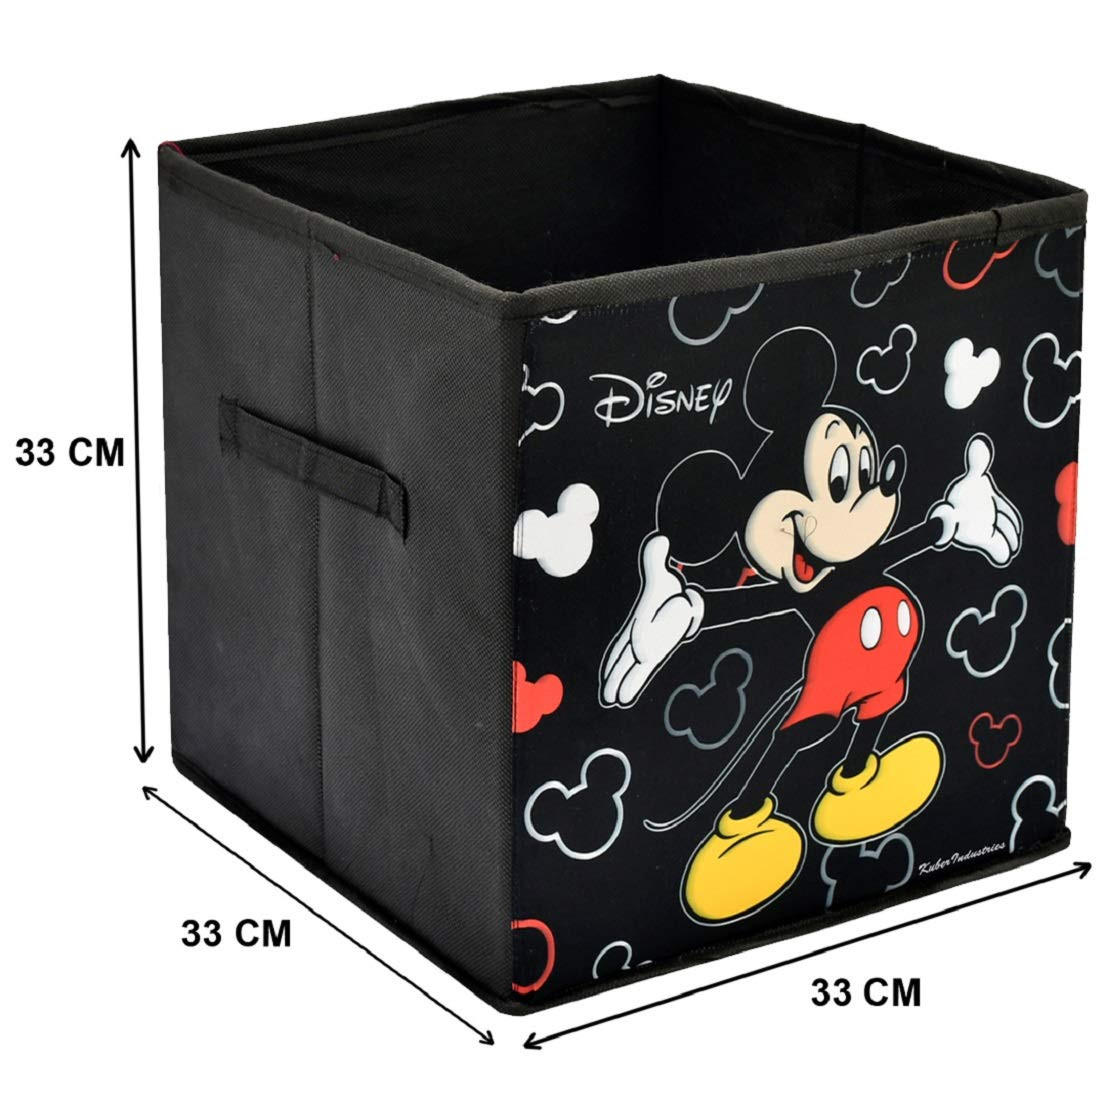 Kuber Industries Disney Print Non Woven Fabric Foldable Large Size Storage Cube Toy And Laundry Bag, Laundry Basket Organizer 45 L (Set Of 2,Black)